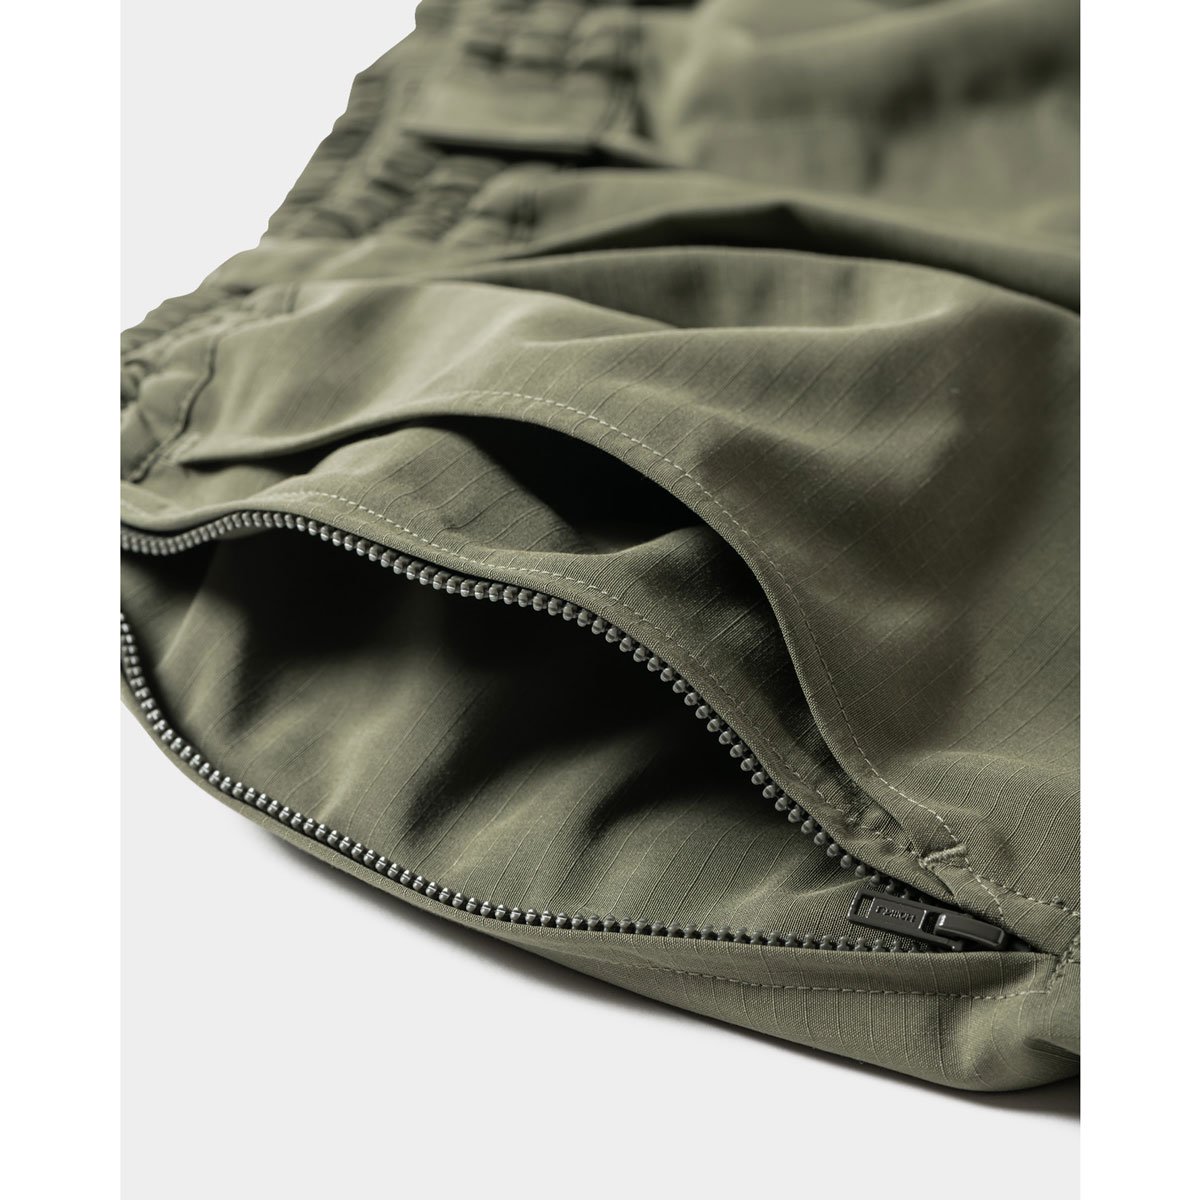 TIGHTBOOTH - T-65 BALLOON CARGO PANTS - SHRED